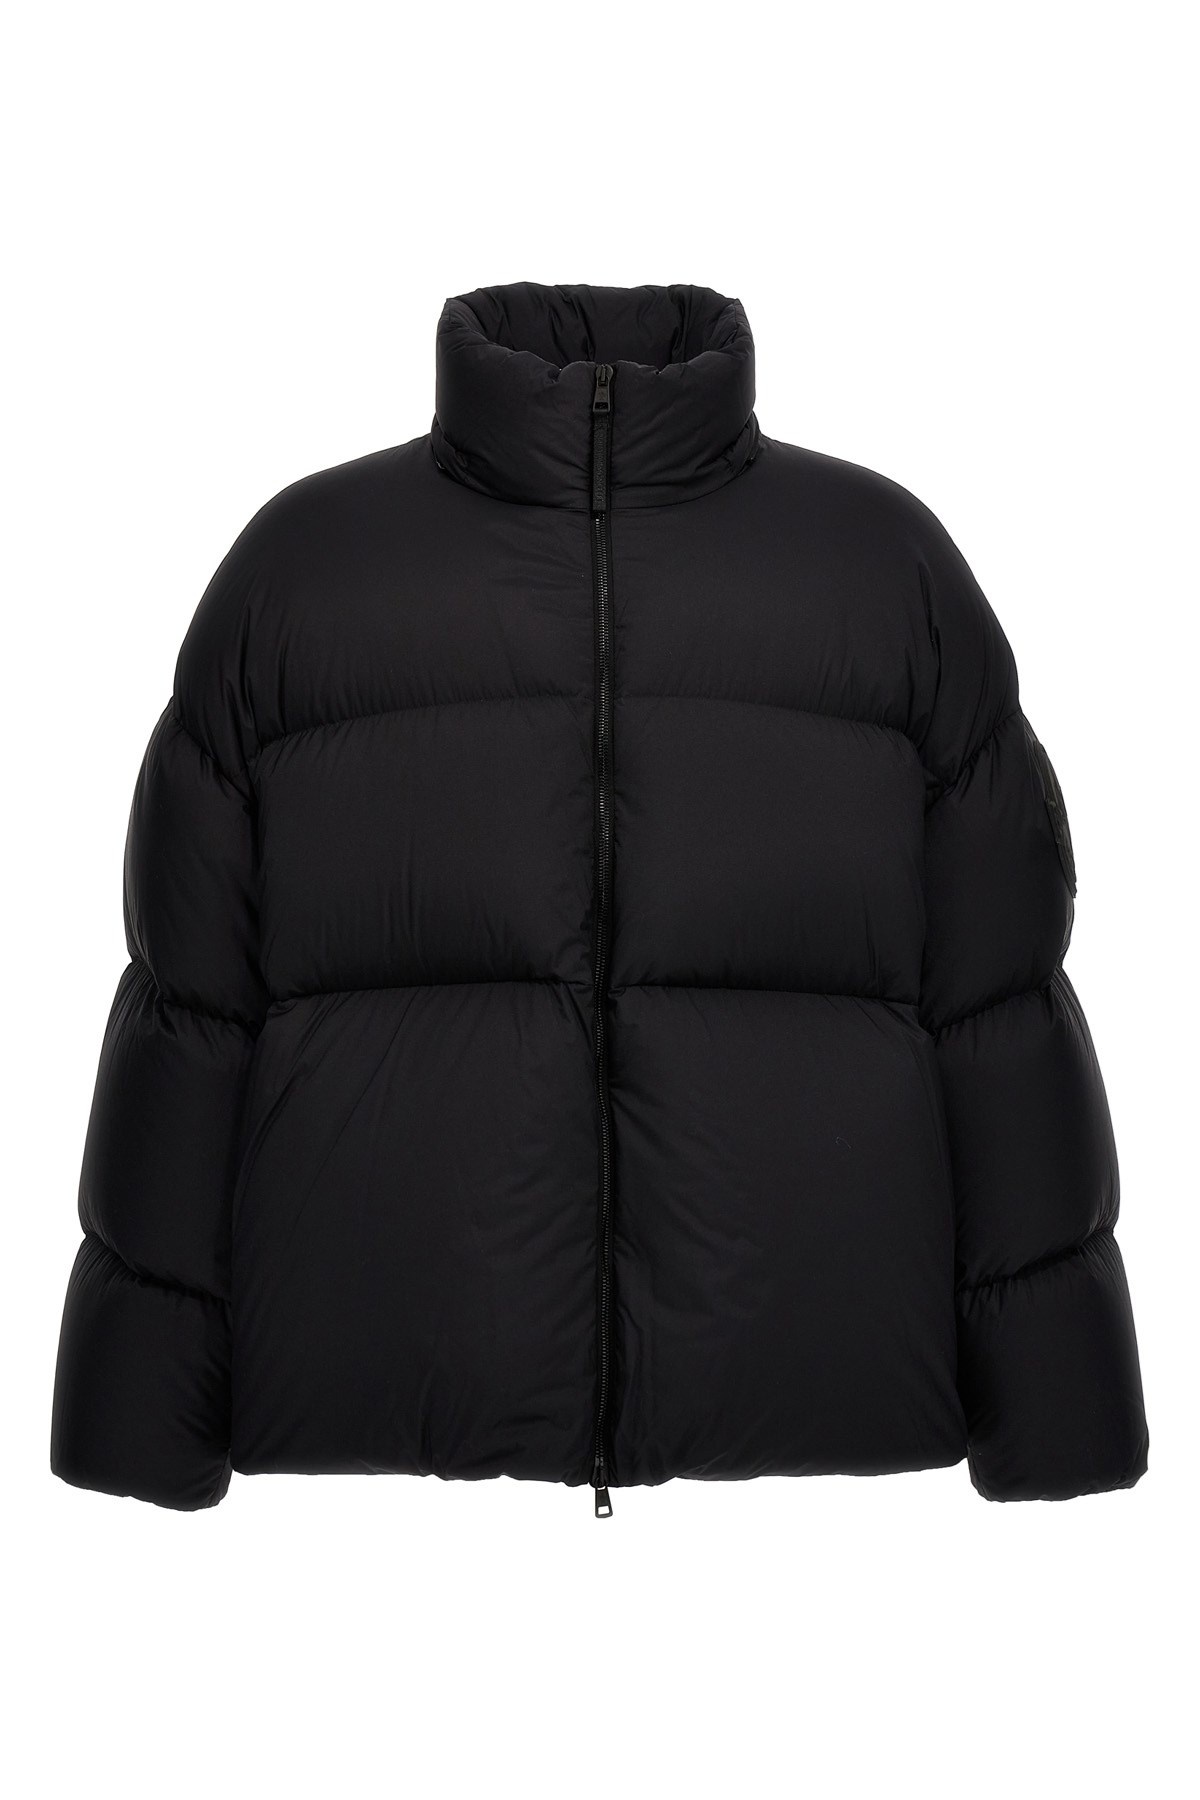 Moncler Genius Roc Nation by Jay-Z down jacket - 3